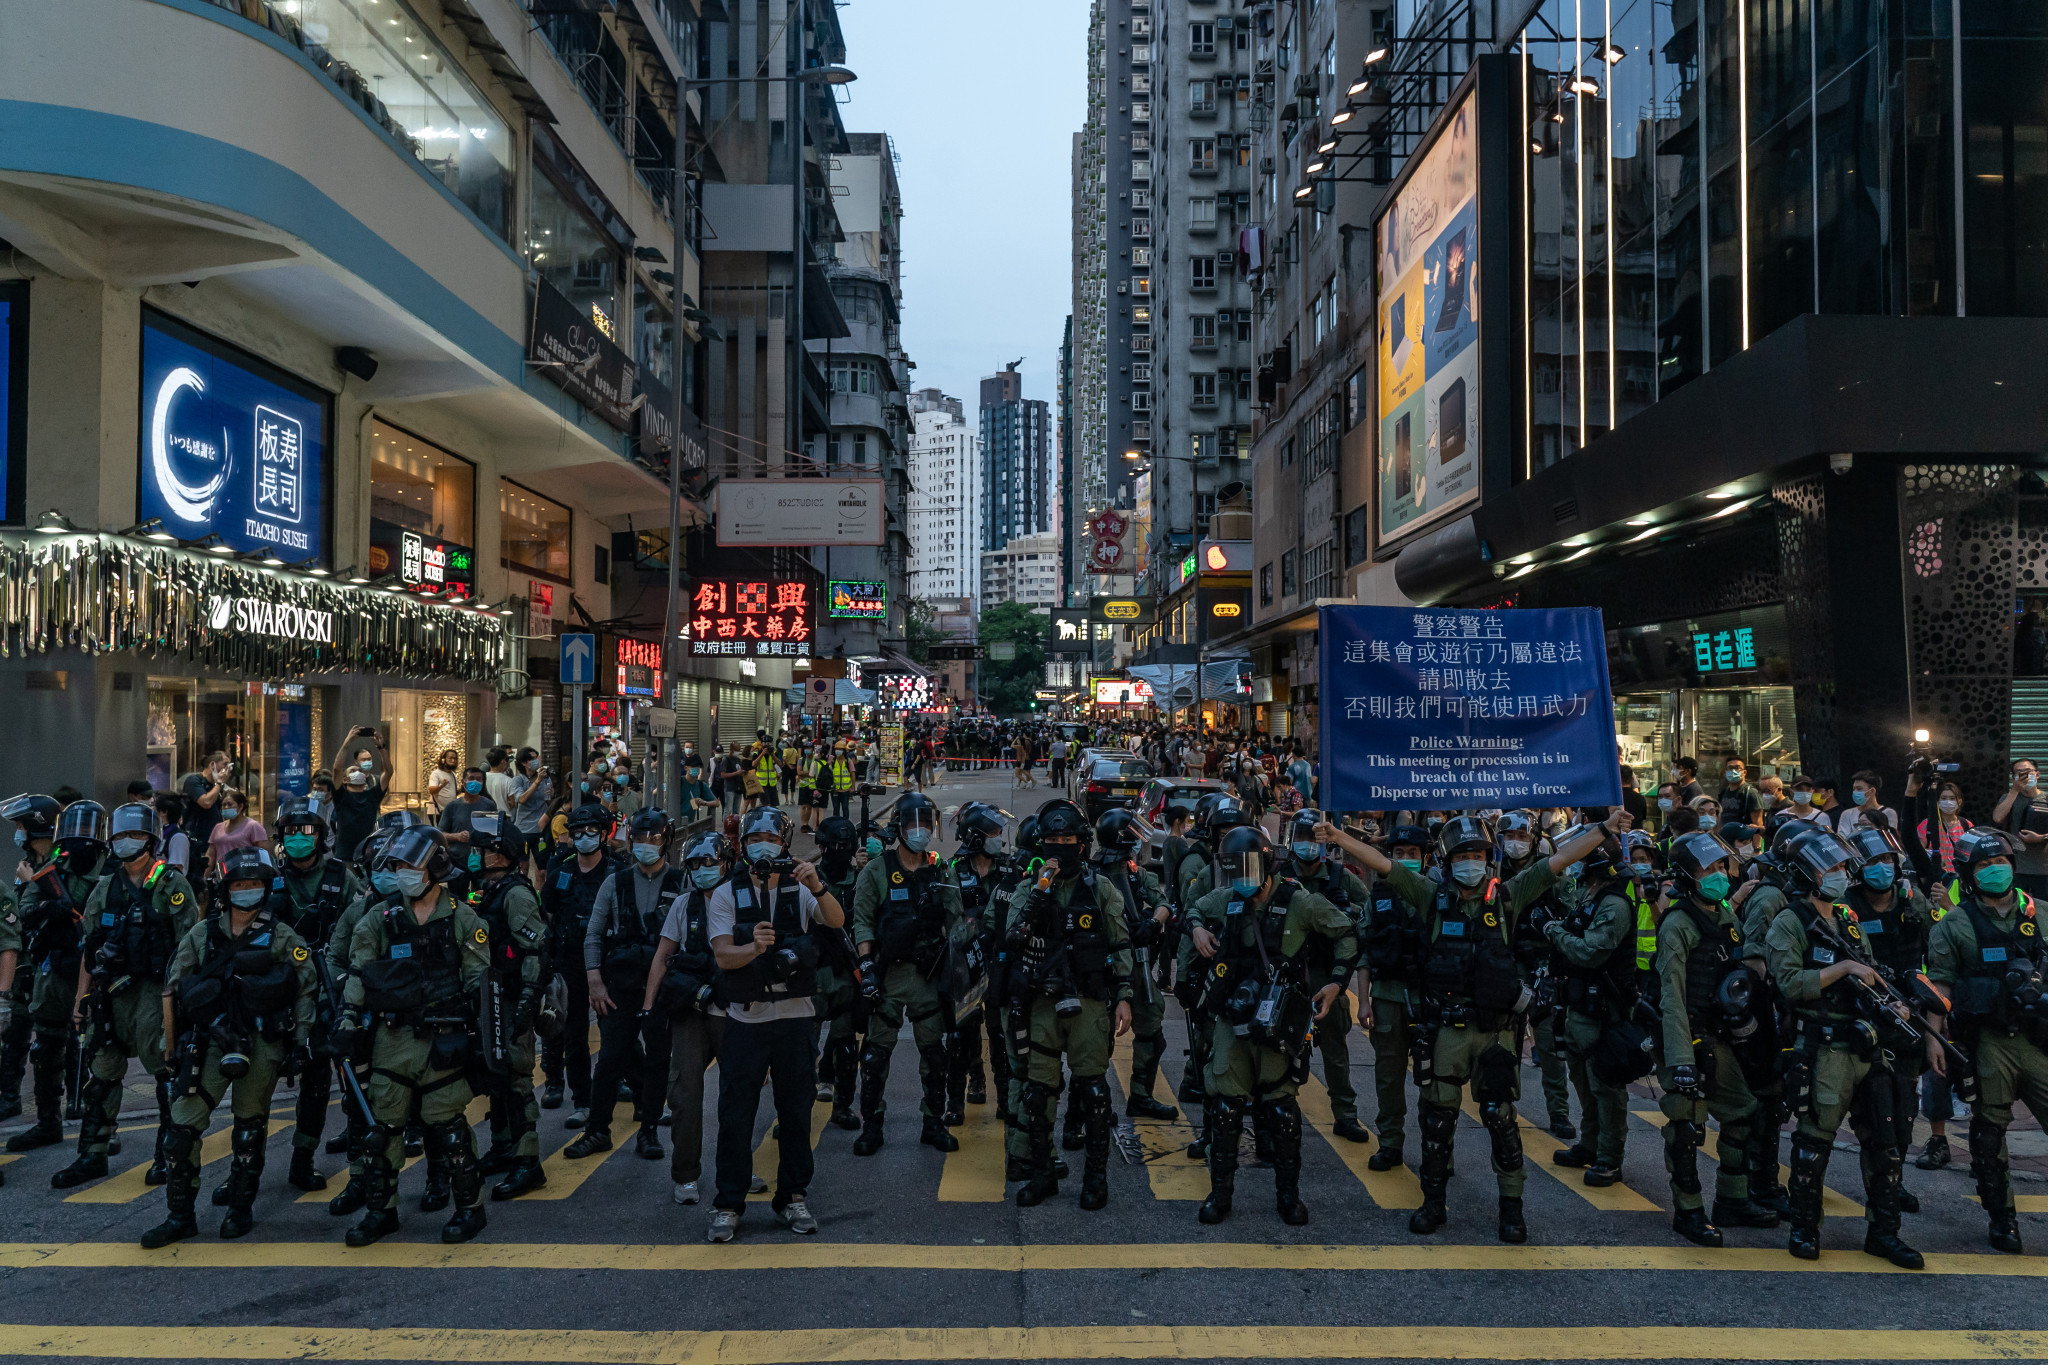 China has faced criticism for a clampdown in Hong Kong following protests ©Getty Images